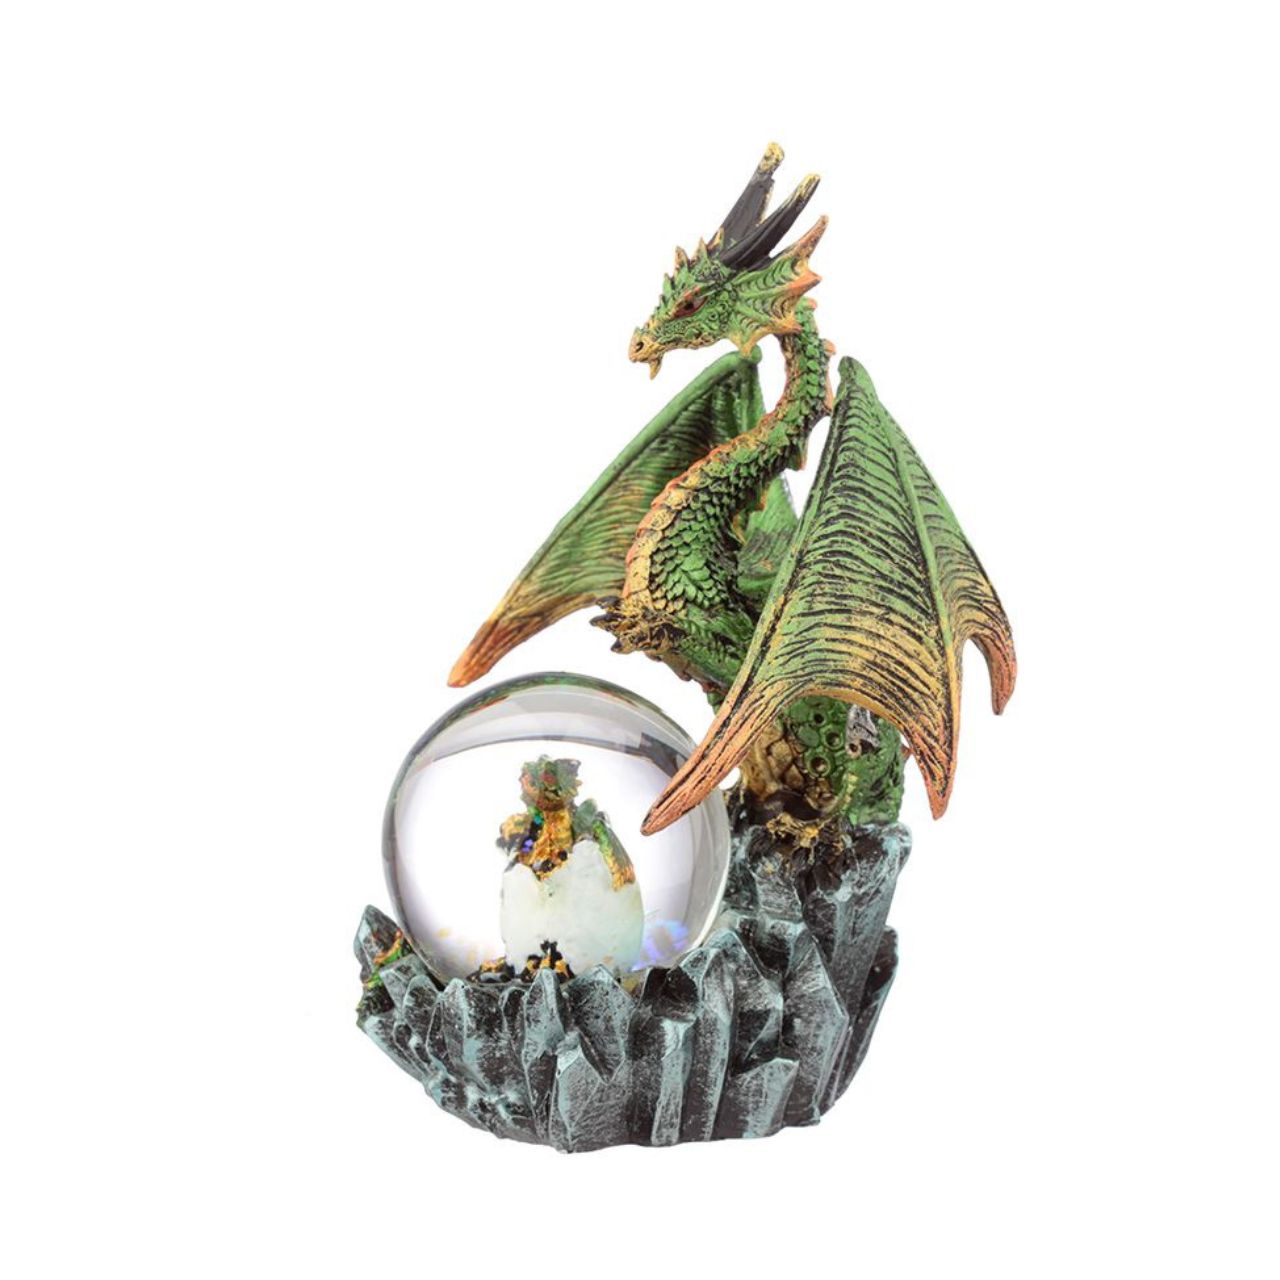 Discover the mystical beauty of the Dark Legends Crystal Orb Dragon Mother Snow Globe by Puckator. Crafted with intricate detail and featuring a majestic dragon mother protecting her crystal orb, this snow globe will add a touch of magic to any space. Perfect for dragon lovers and collectors.